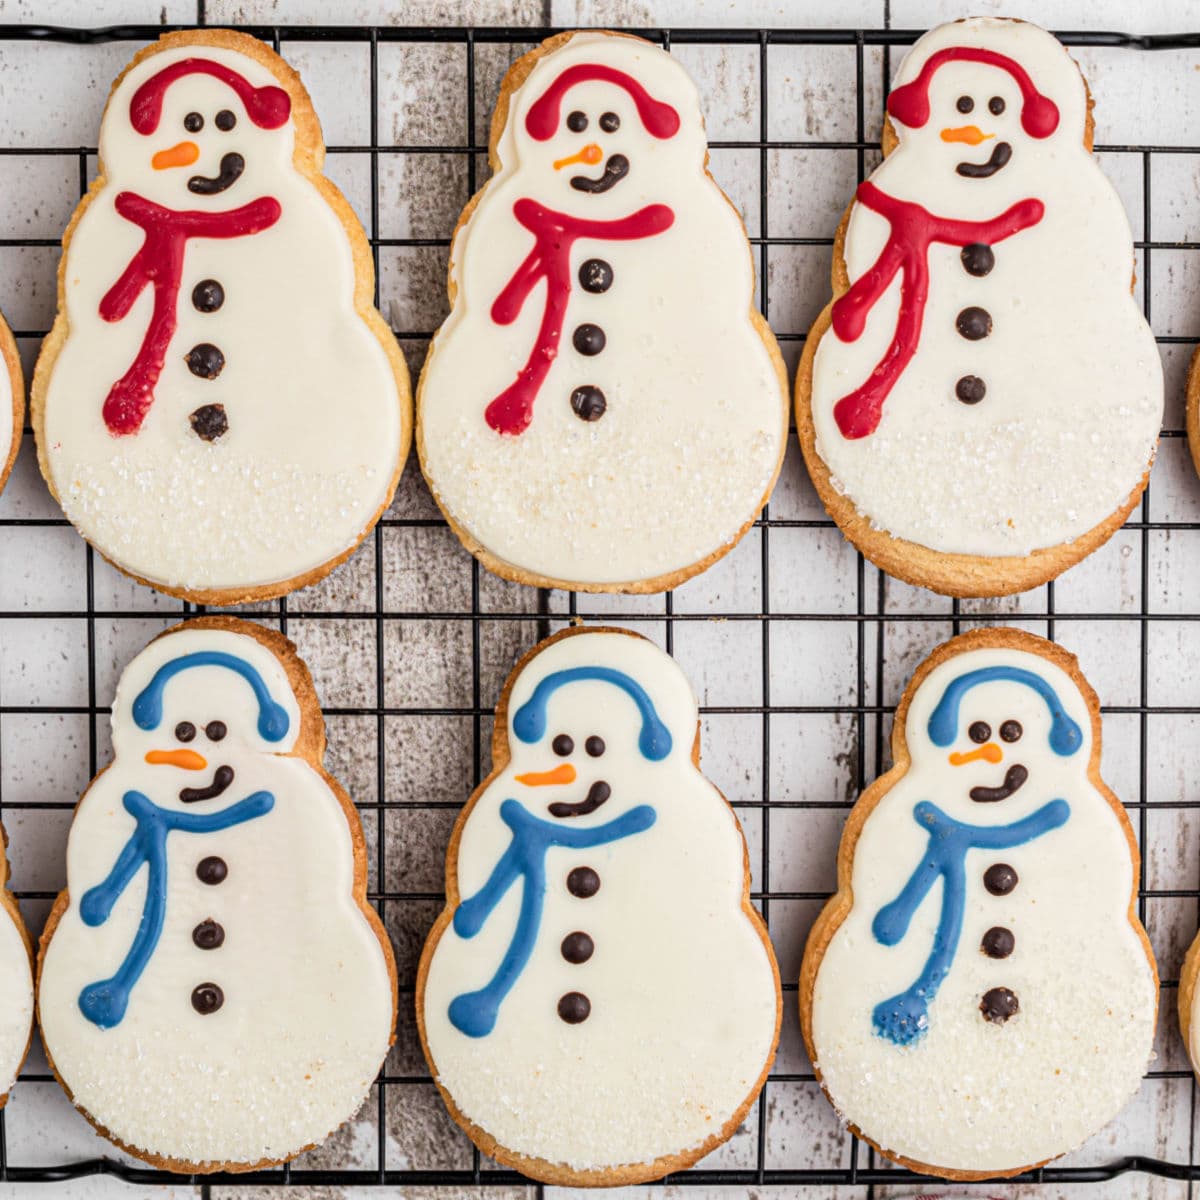 Top 10 Cookie Decorating Tools - Beginners Guide to Cookie